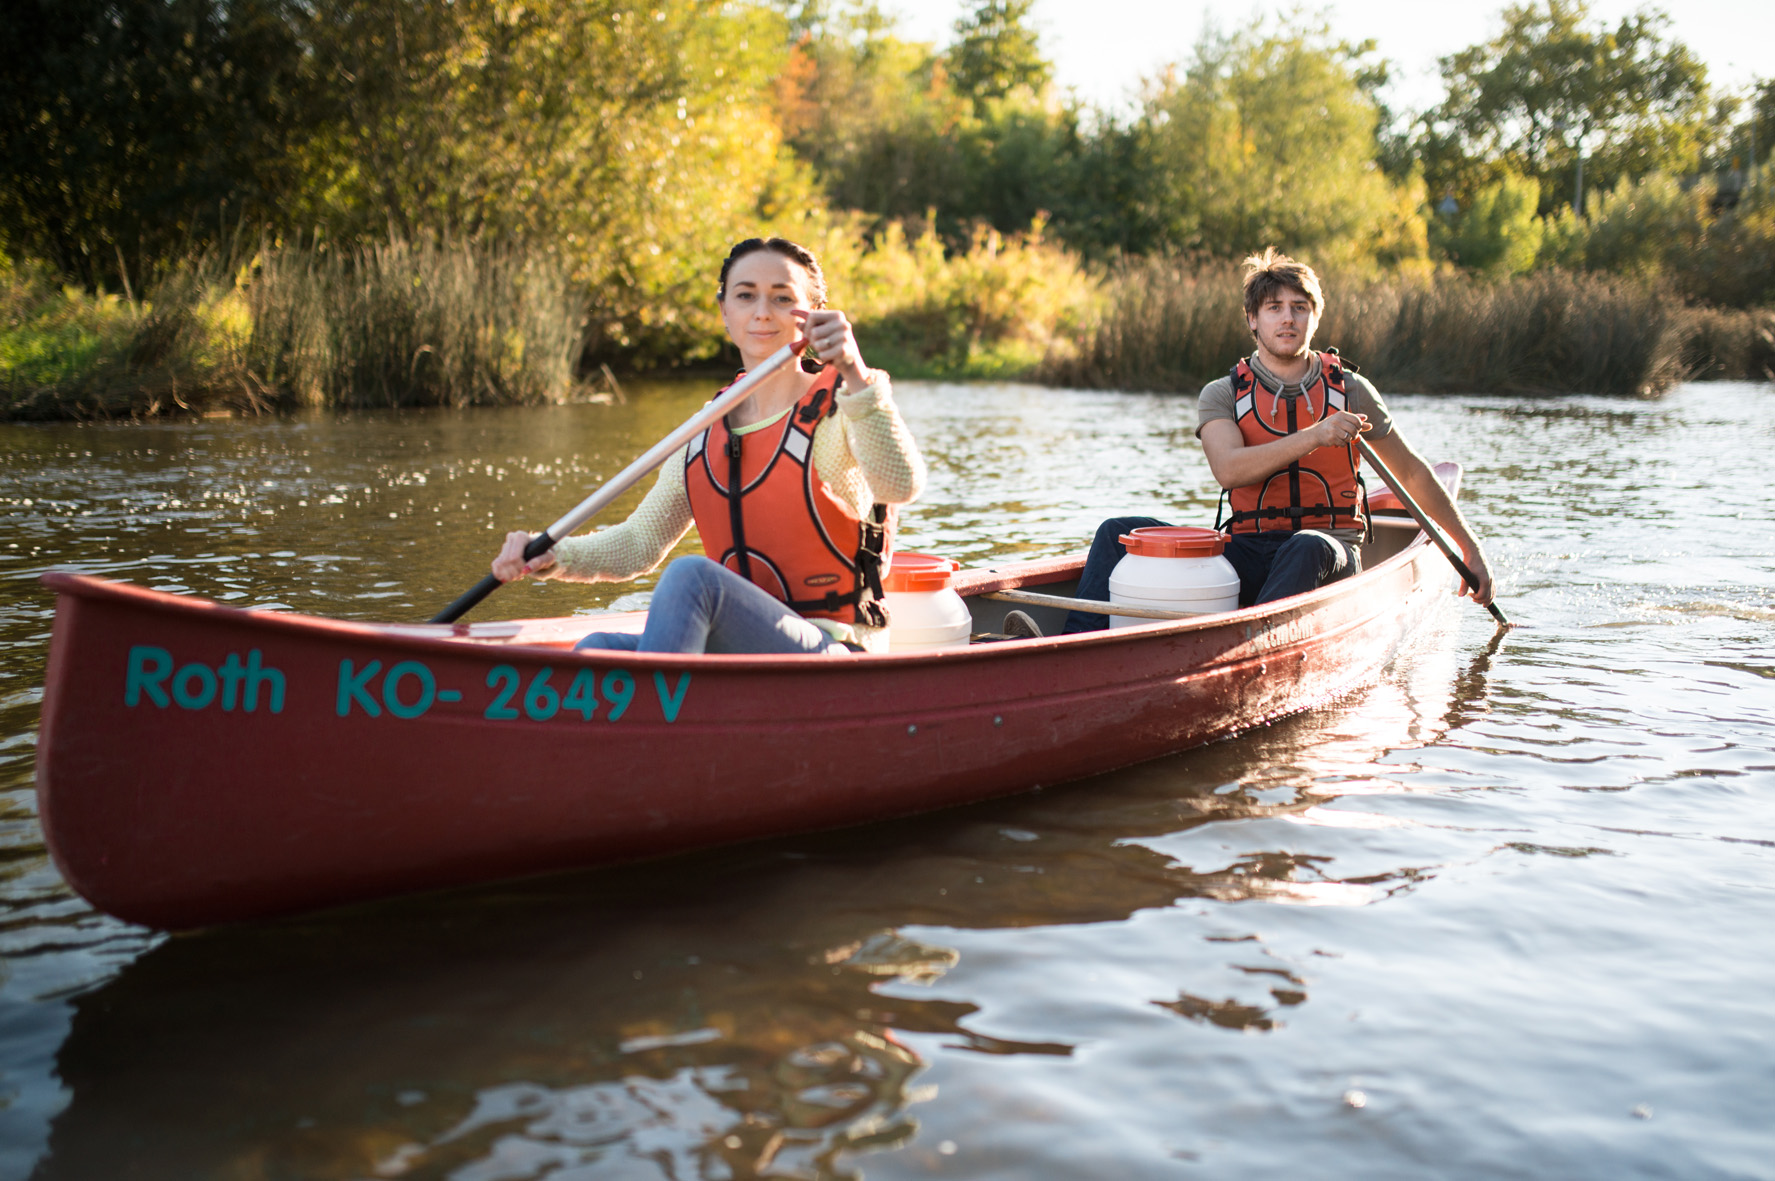 Two white people in a canoe on a river